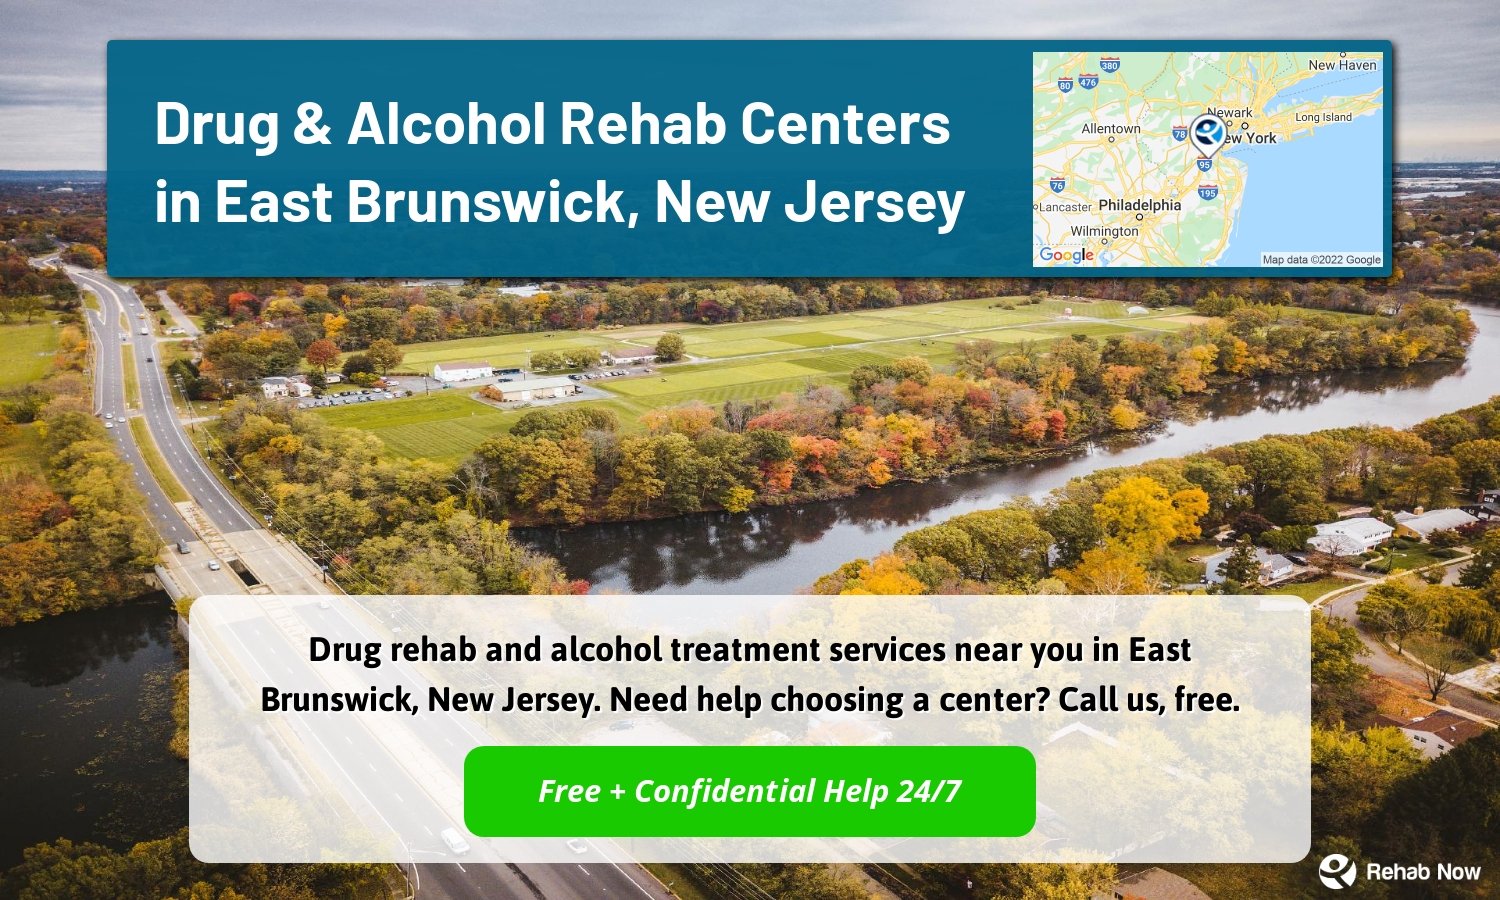 Drug rehab and alcohol treatment services near you in East Brunswick, New Jersey. Need help choosing a center? Call us, free.